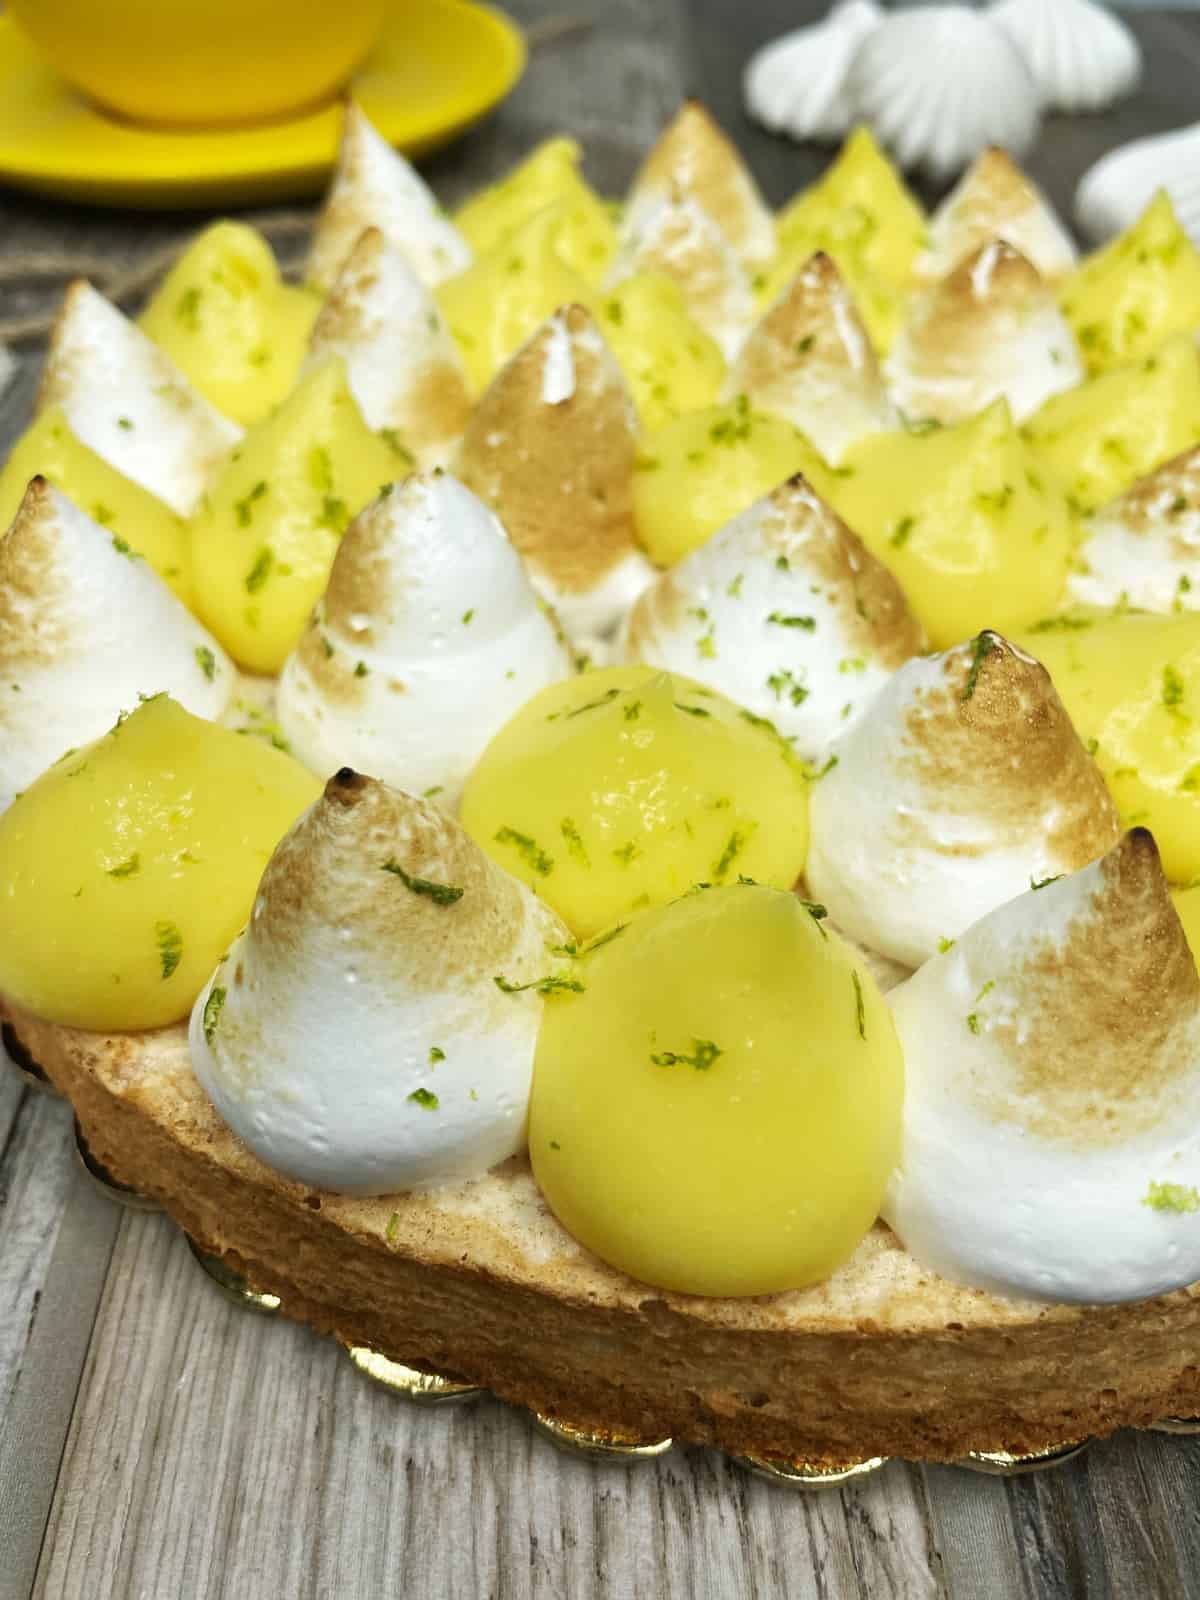 Tart with piped lemon cream and meringue balls and sprinkled with lime zest